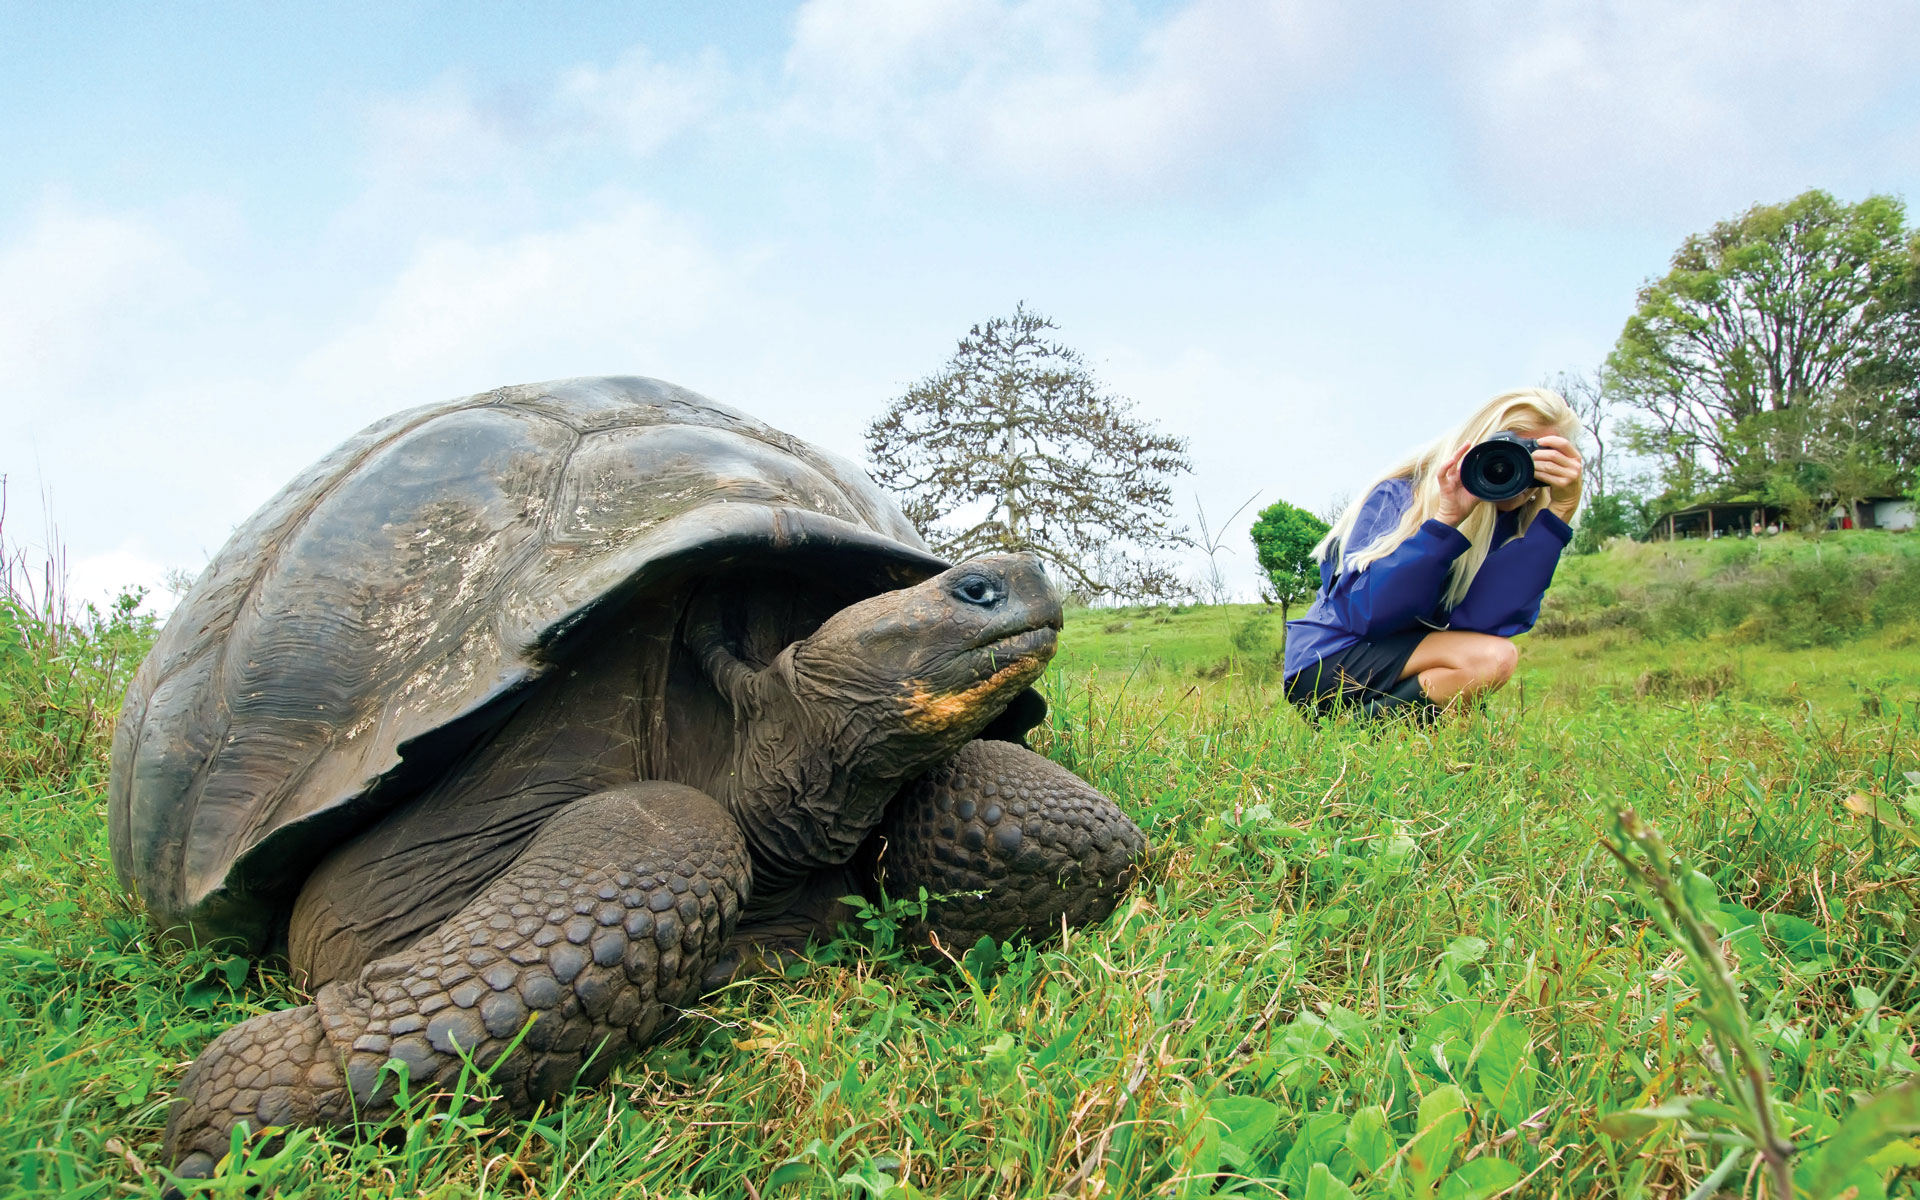 Woman in blue top kneels in grass to photograph a giant tortoise on a sunny day during the best time to visit Galapagos.